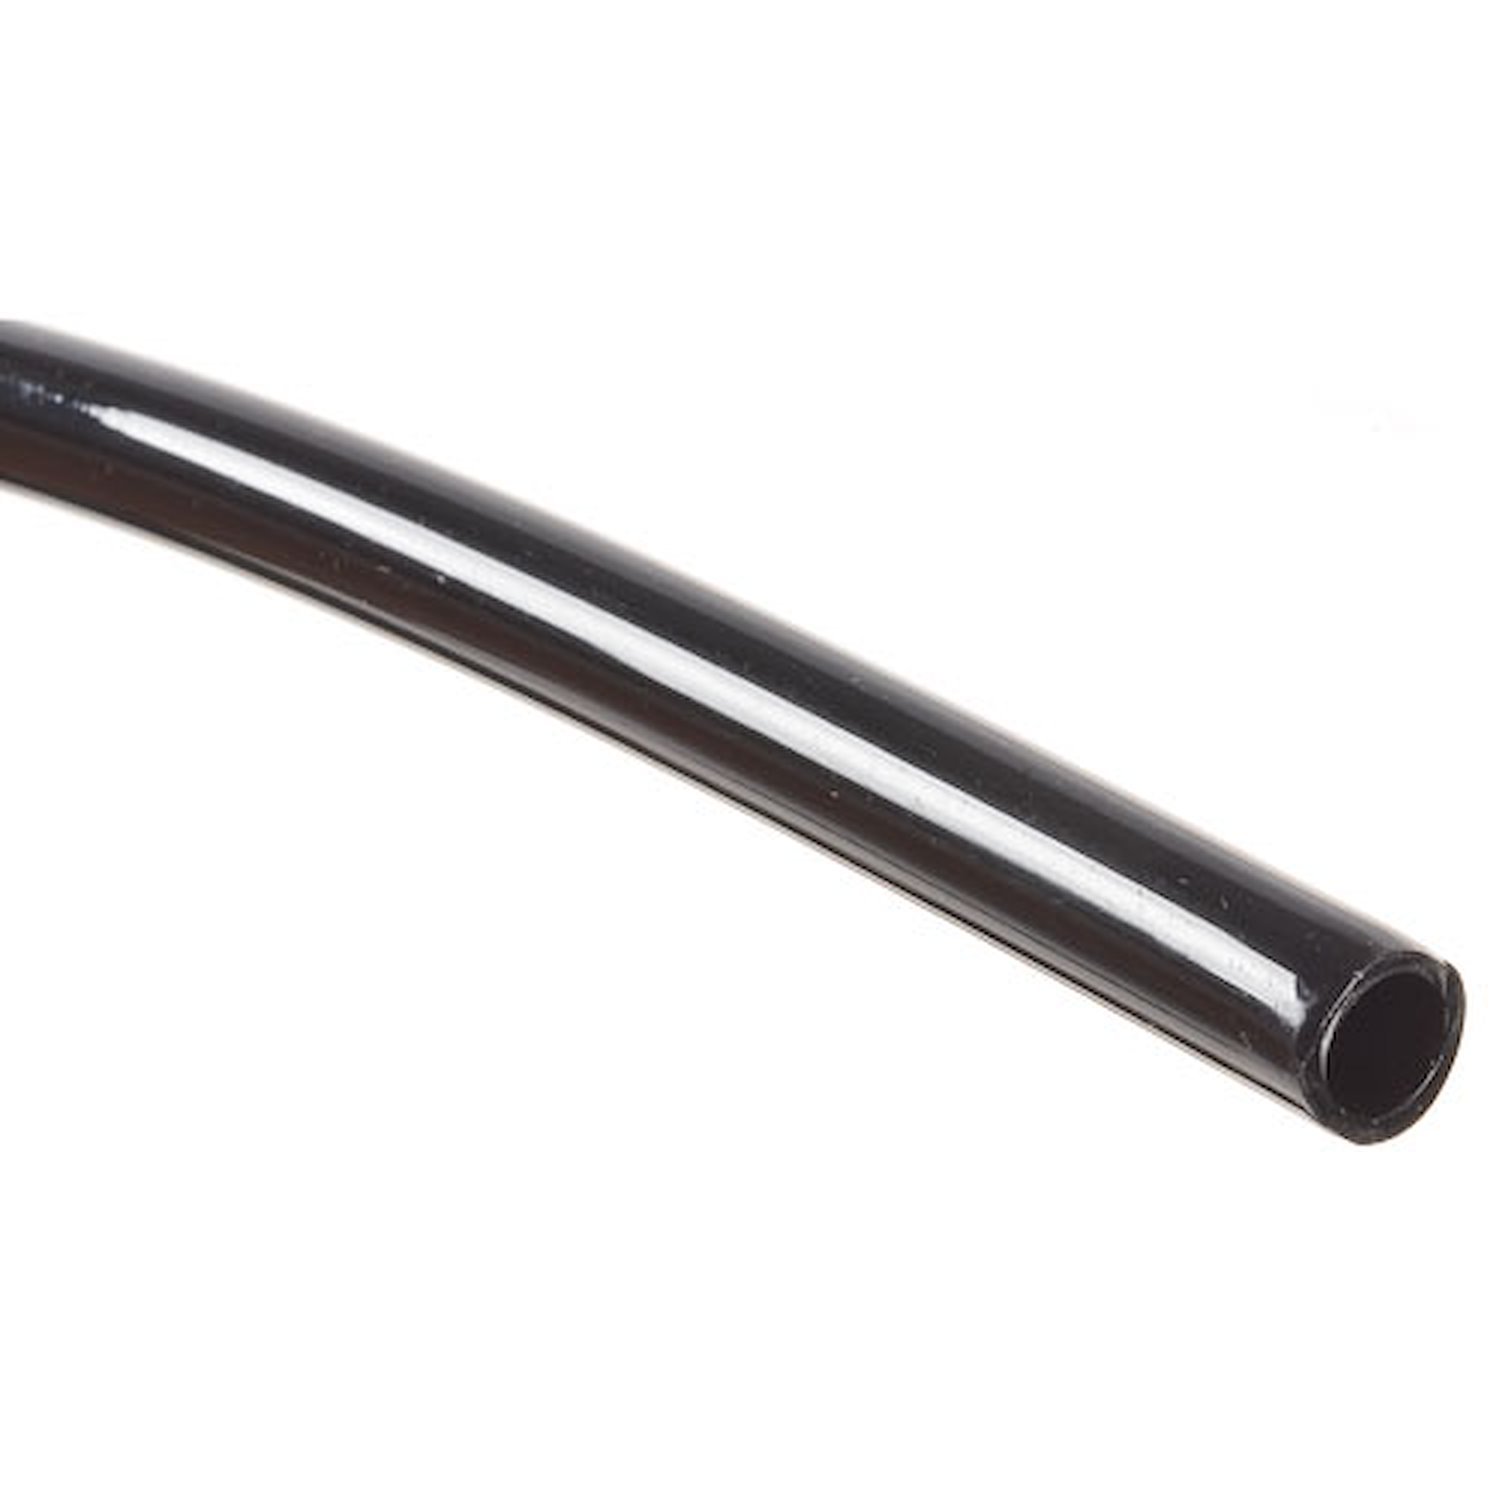 Nylon Fuel Injection Tubing [5/16 in. O.D. x 25 ft.]